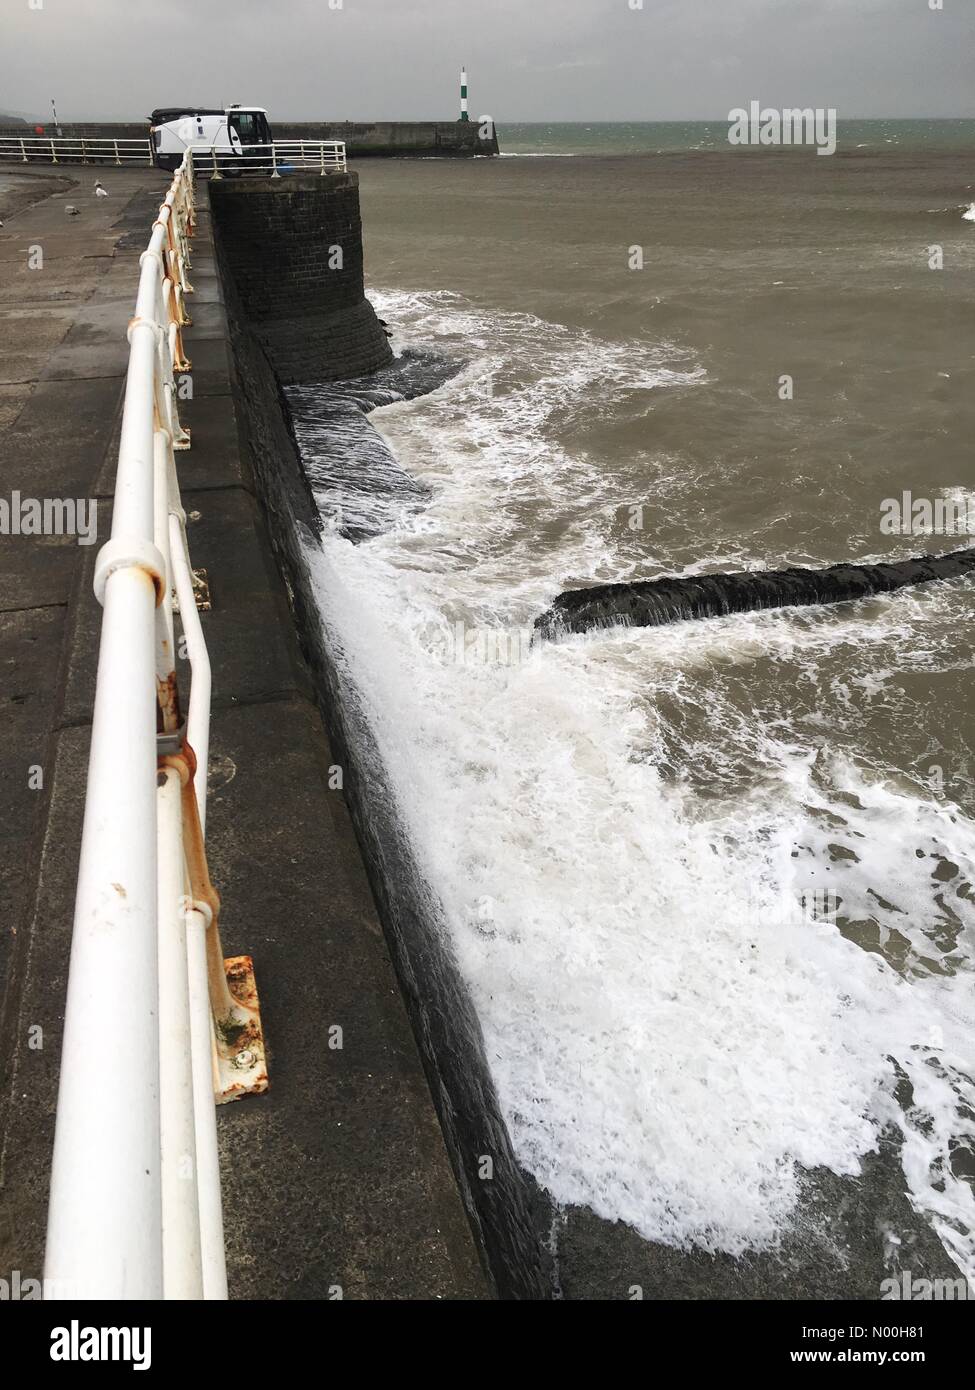 UK Weather- Storm Ophelia at Aberystwyth Wales - Strong winds blowing in from the South West across the Irish Sea begin to batter the harbour walls as Ophelia approaches. Stock Photo